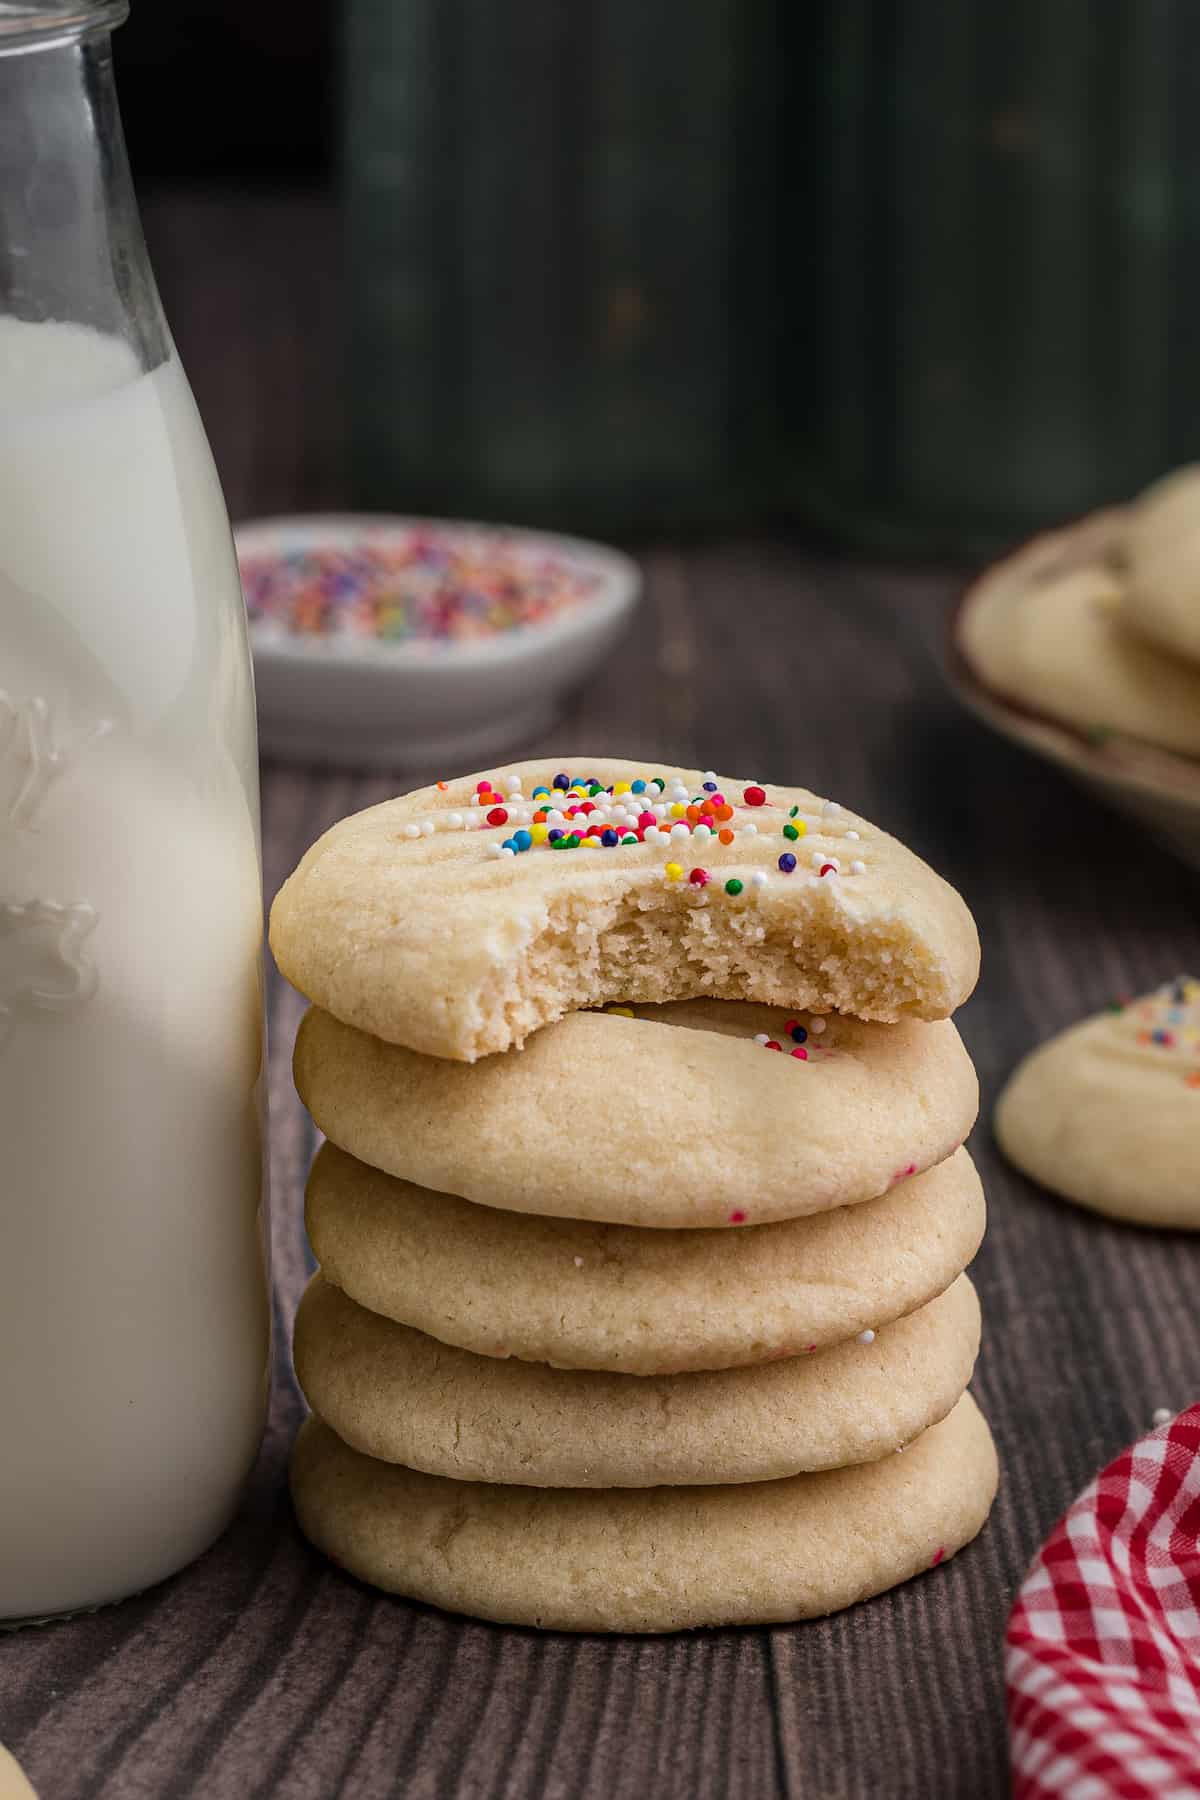 A stack of shortbread cookies and a bottle of milk.